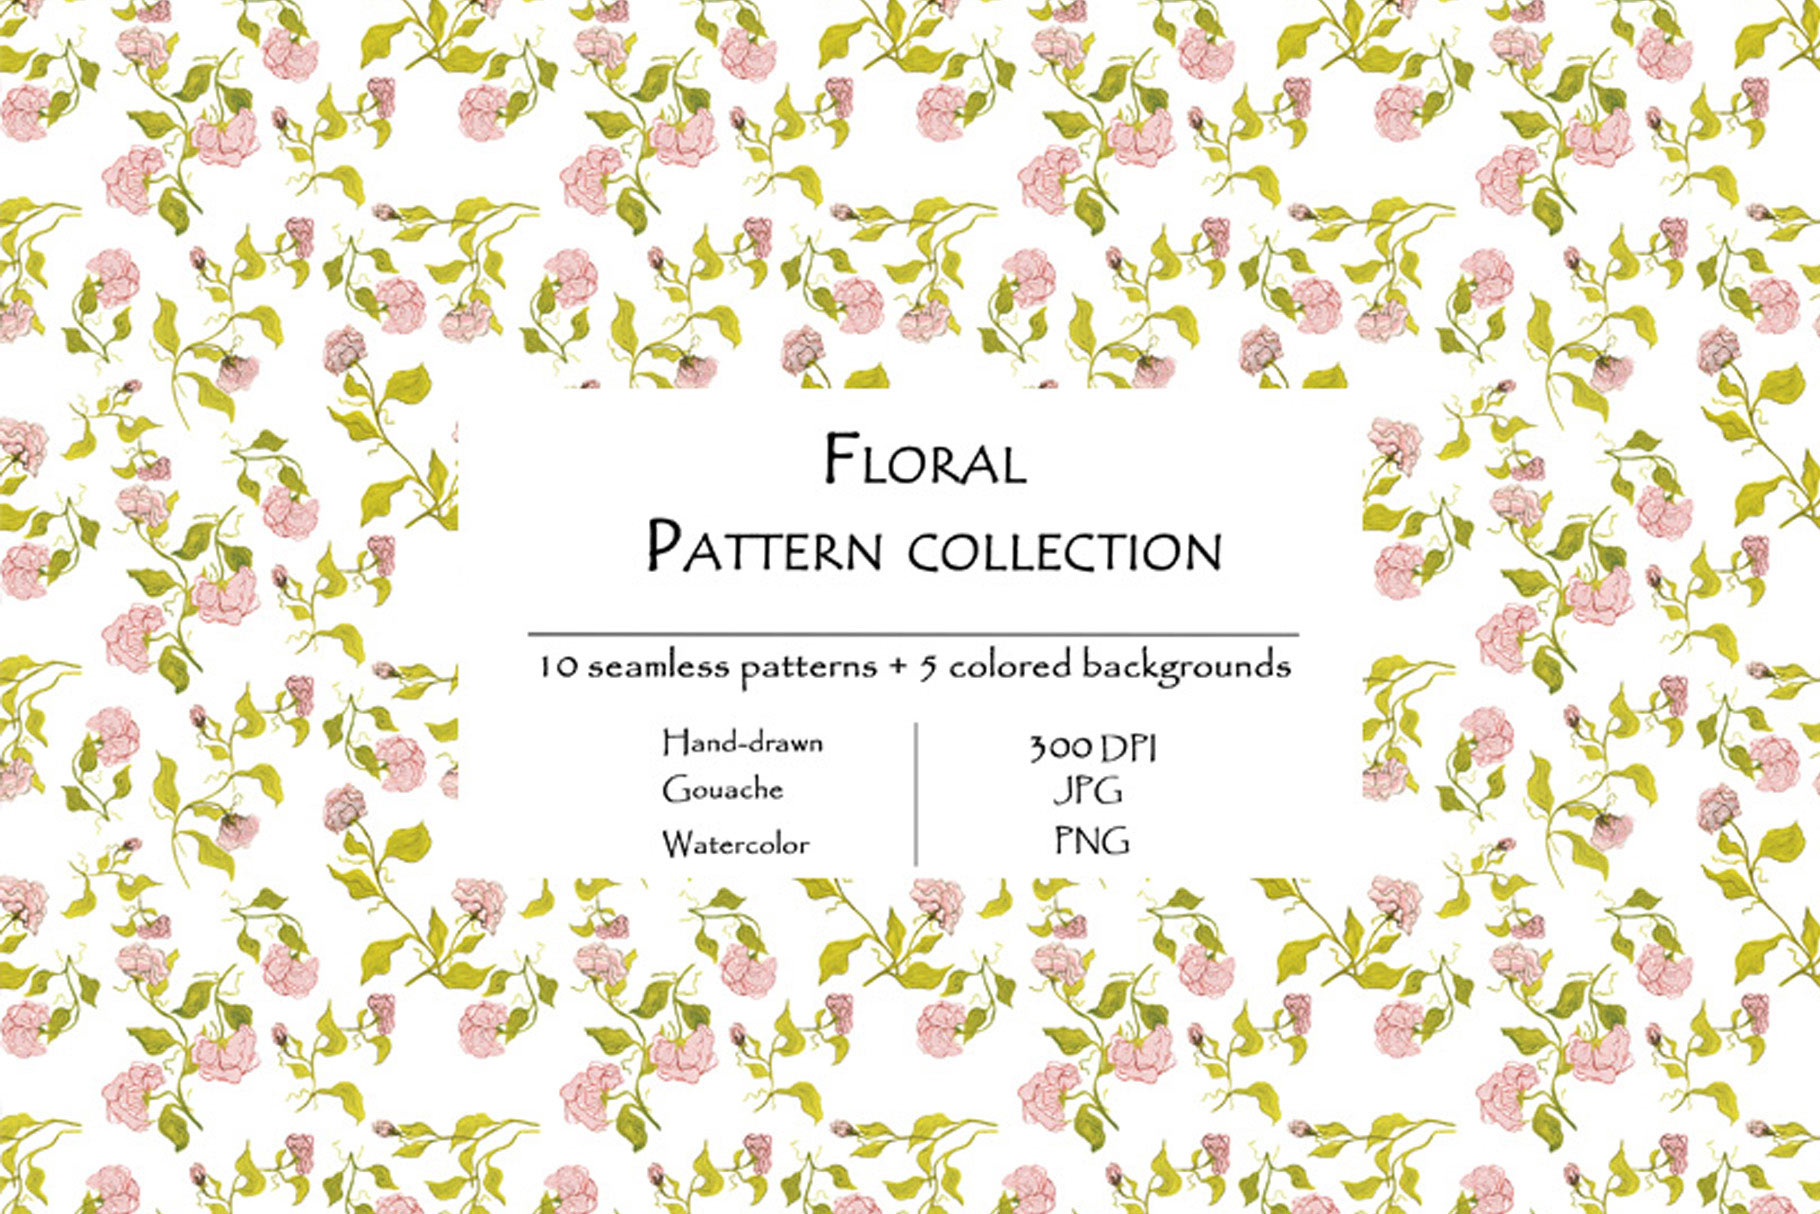 Floral Pattern Collection Of 10 Seamless Patterns And 5 Colored Backgrounds Seamless Pattern.